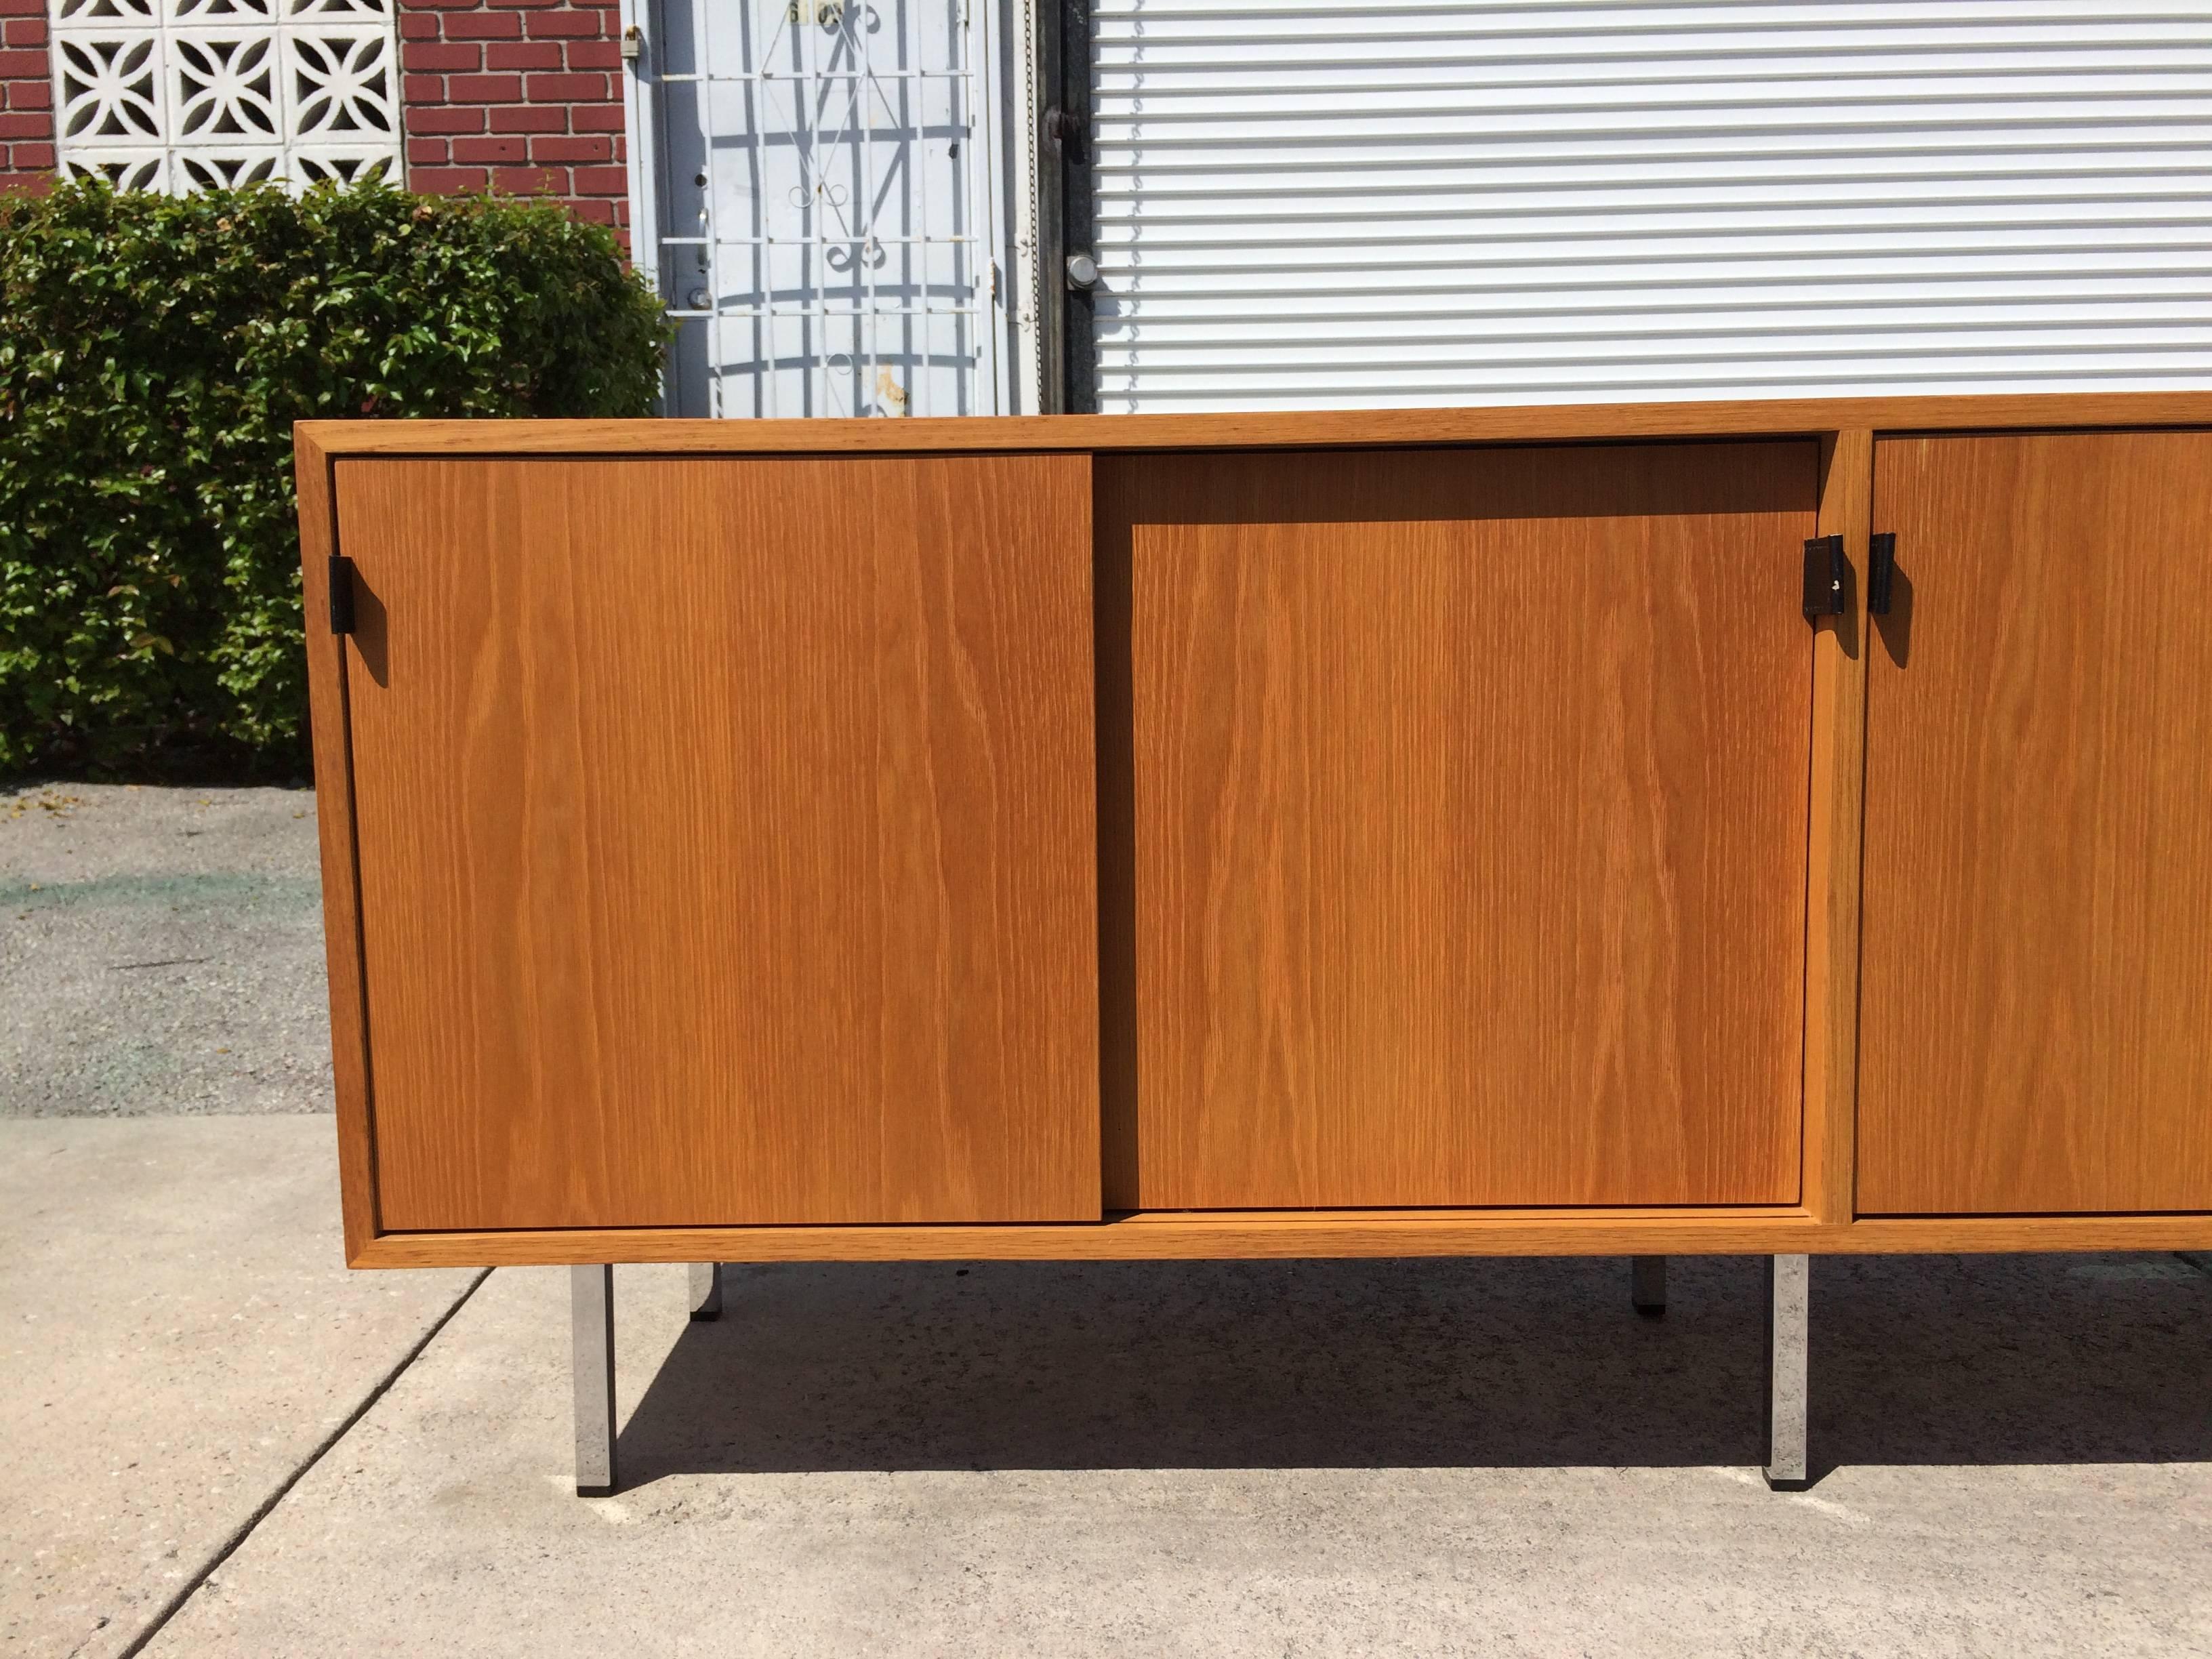 Credenza on six chrome legs, four sliding doors with black leather pulls. Behind the sliding doors are six shelves.